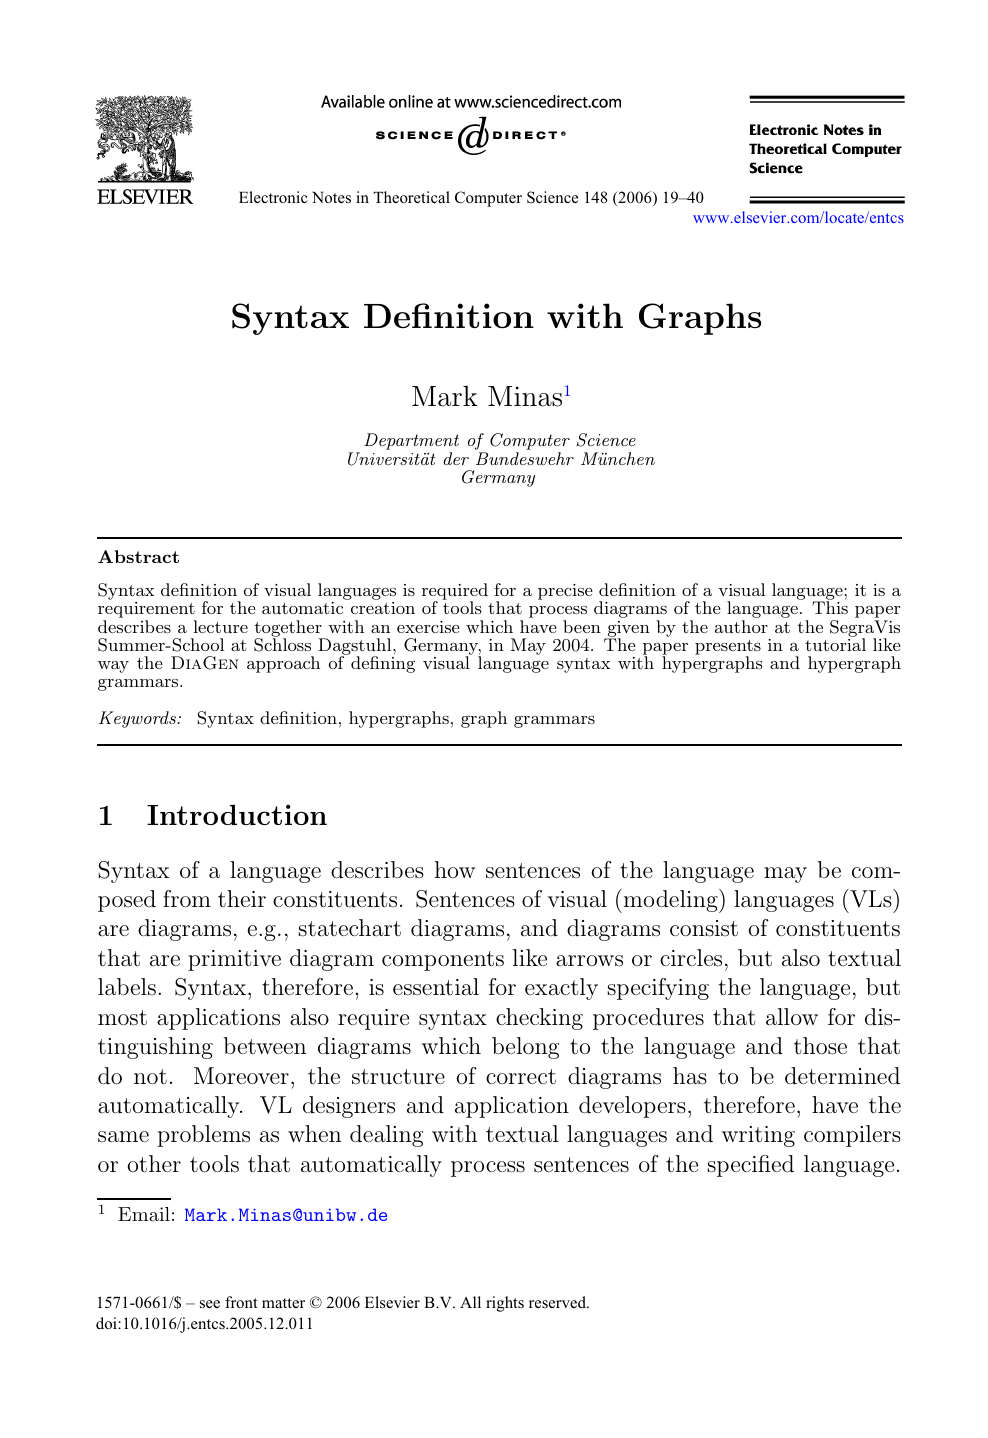 Syntax Definition With Graphs Topic Of Research Paper In Computer And Information Sciences Download Scholarly Article Pdf And Read For Free On Cyberleninka Open Science Hub